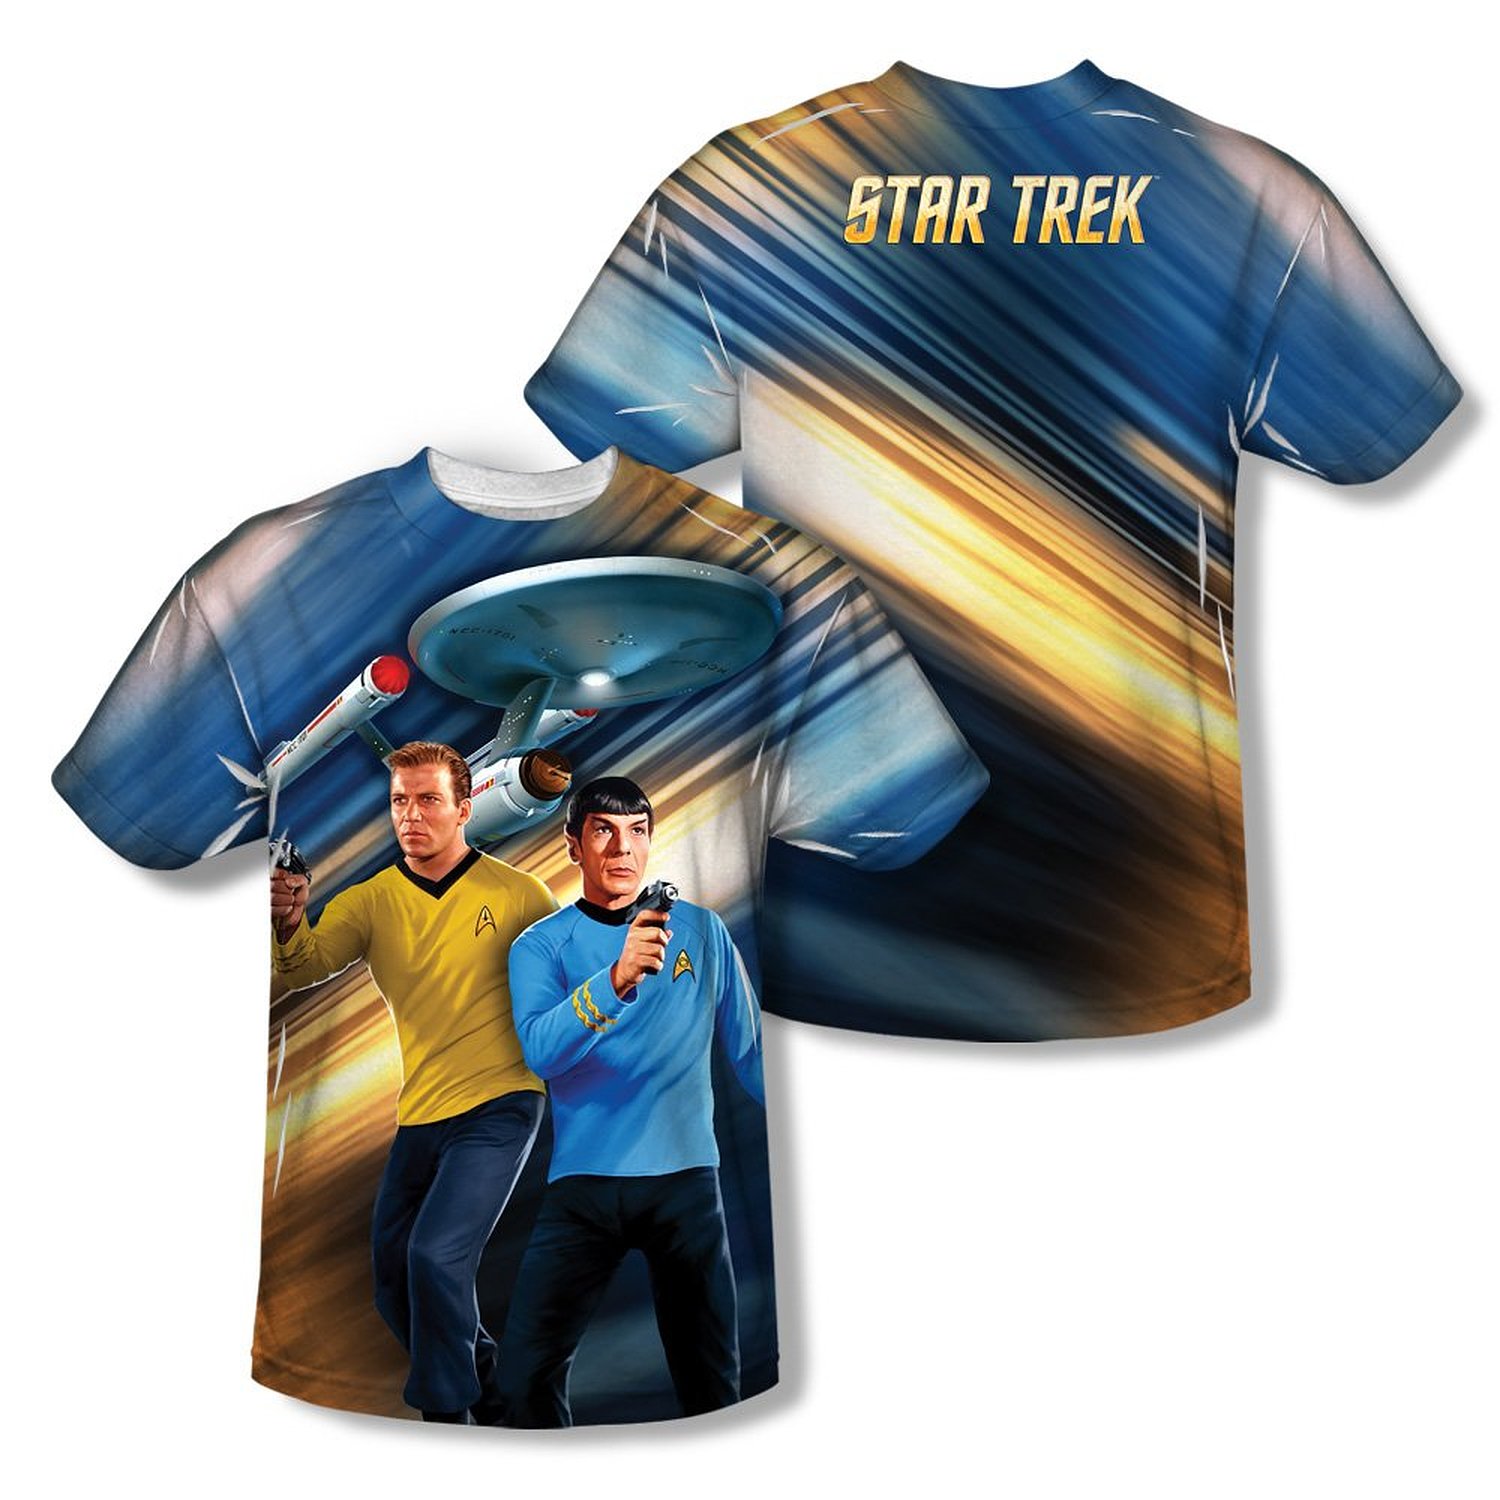 The Trek Collective: T-shirts Haynes TNG, and on TOS, sublimation awesome Manual more images